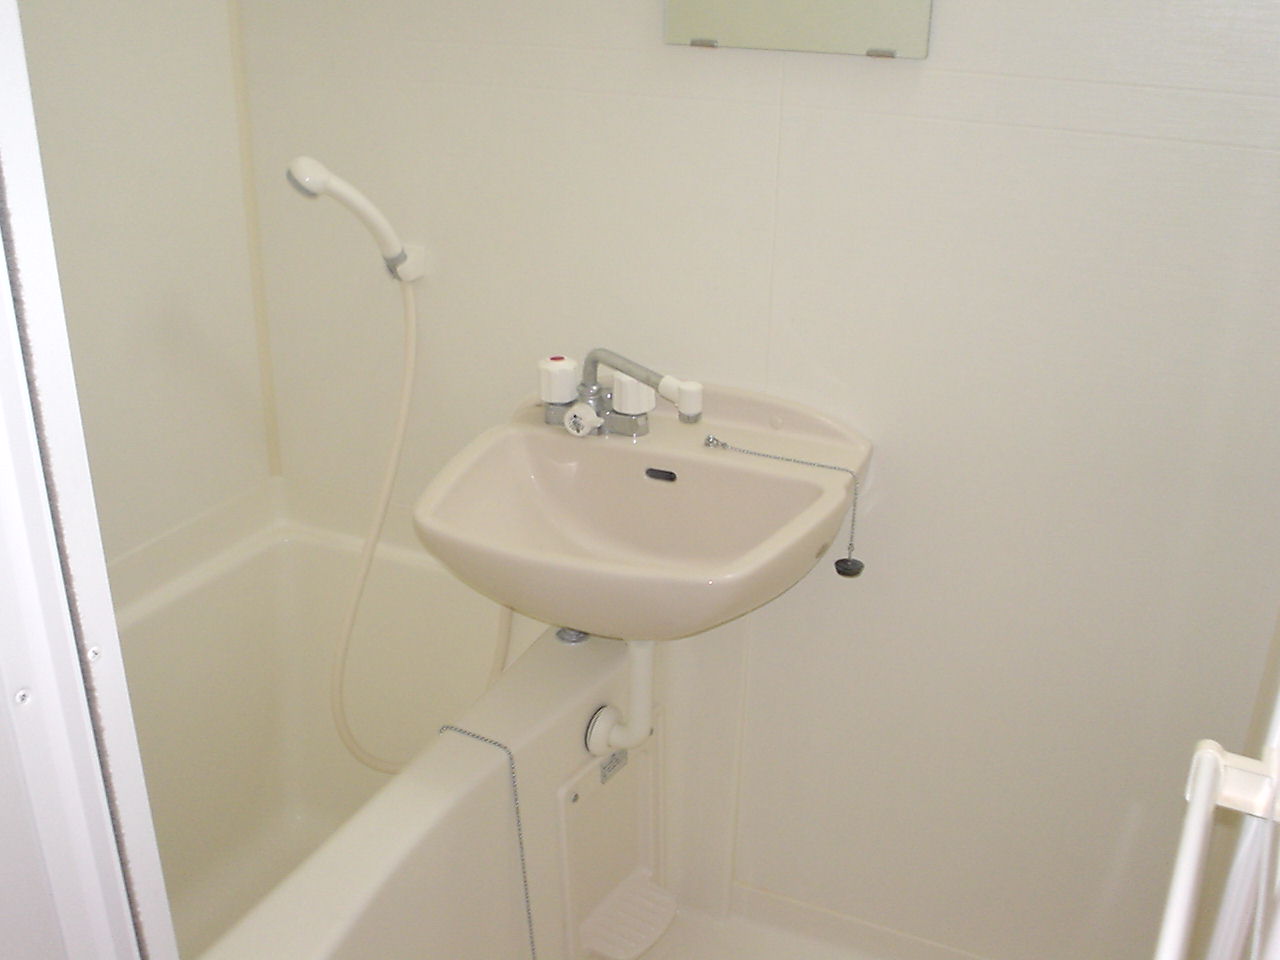 Bath. It is a bathroom with a shower. It is with a bathroom ventilation dryer. 